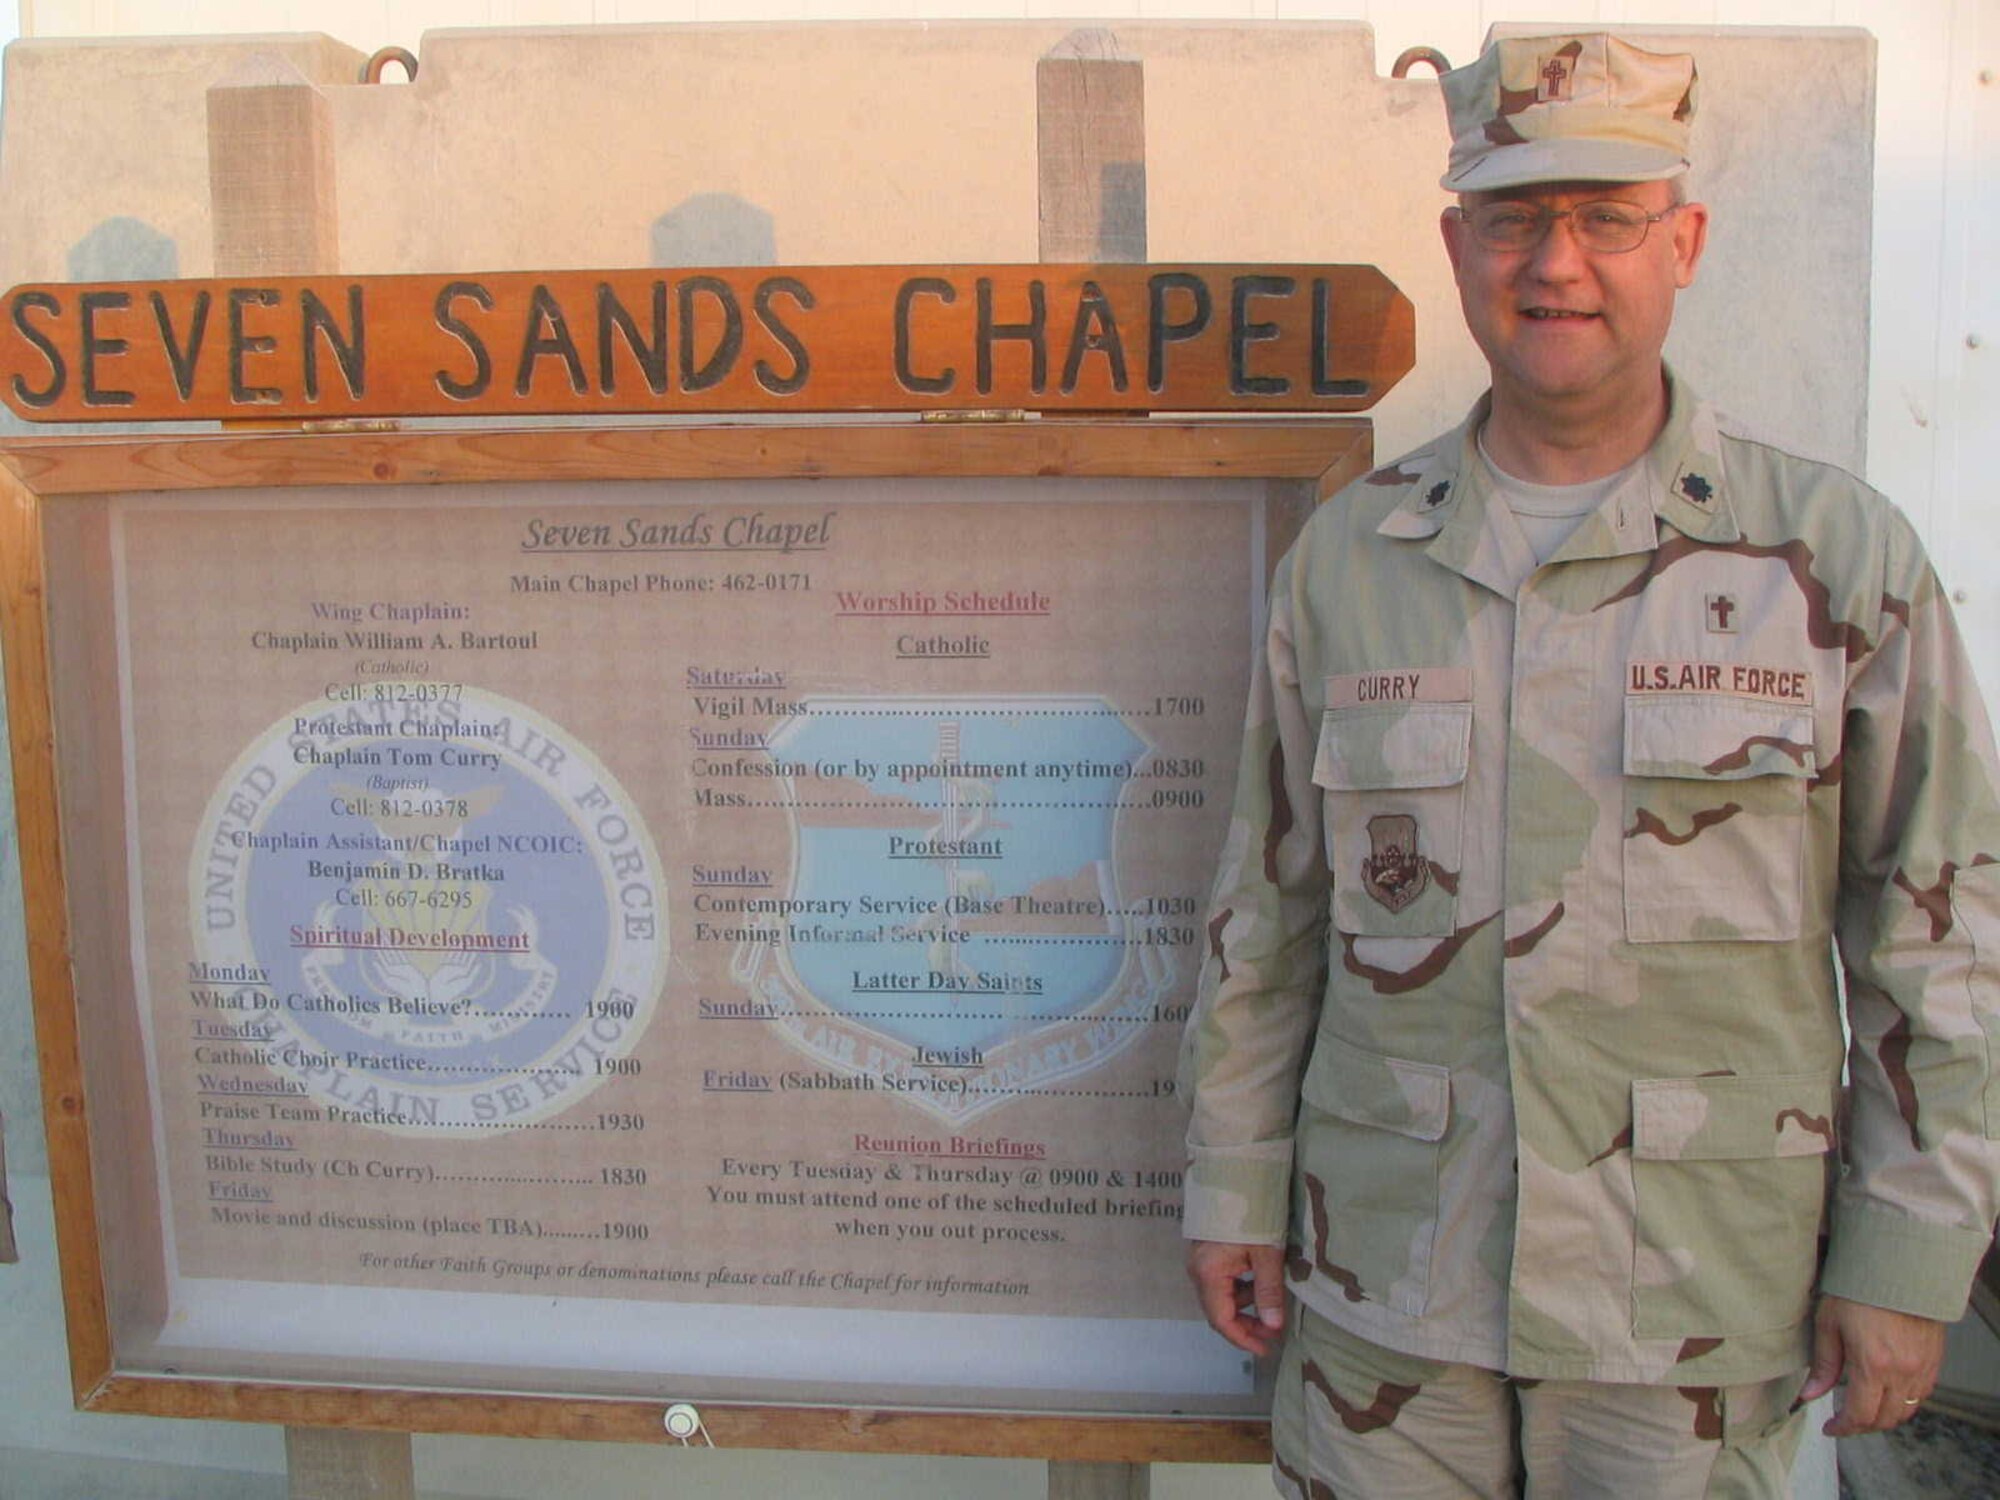 Lt. Col. Tom Curry, a Kentucky Air Guard chaplain, served for nearly 70 days at
Al Dhafra Air Base, United Arab Emirates, operating out of the Seven Sands Chapel. (Photo courtesy Lt. Col. Tom Curry)